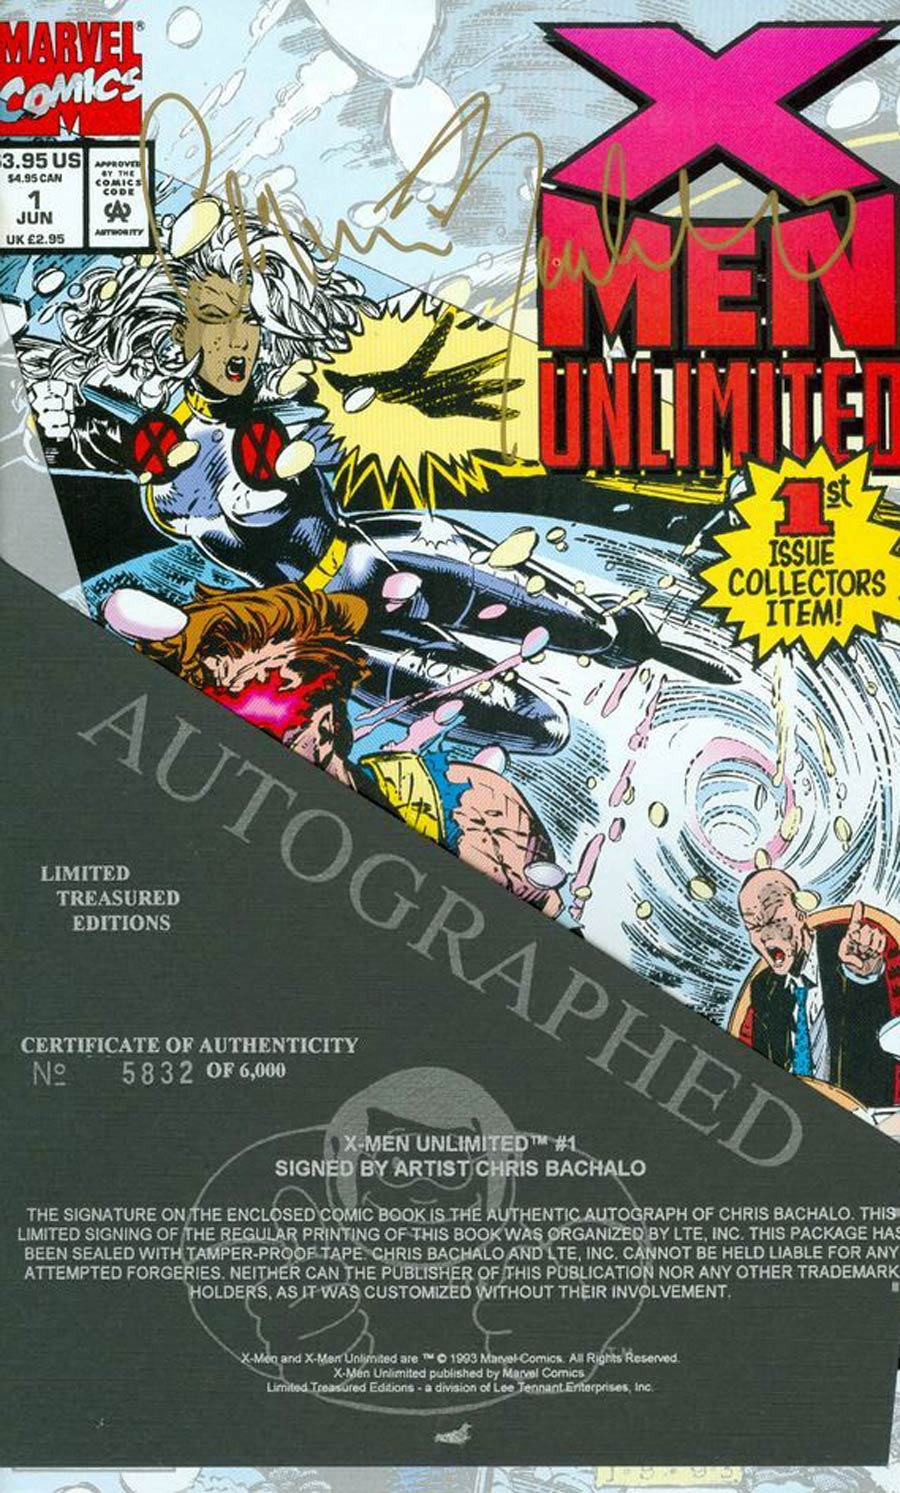 X-Men Unlimited #1 Cover D Limited Treasured Edition